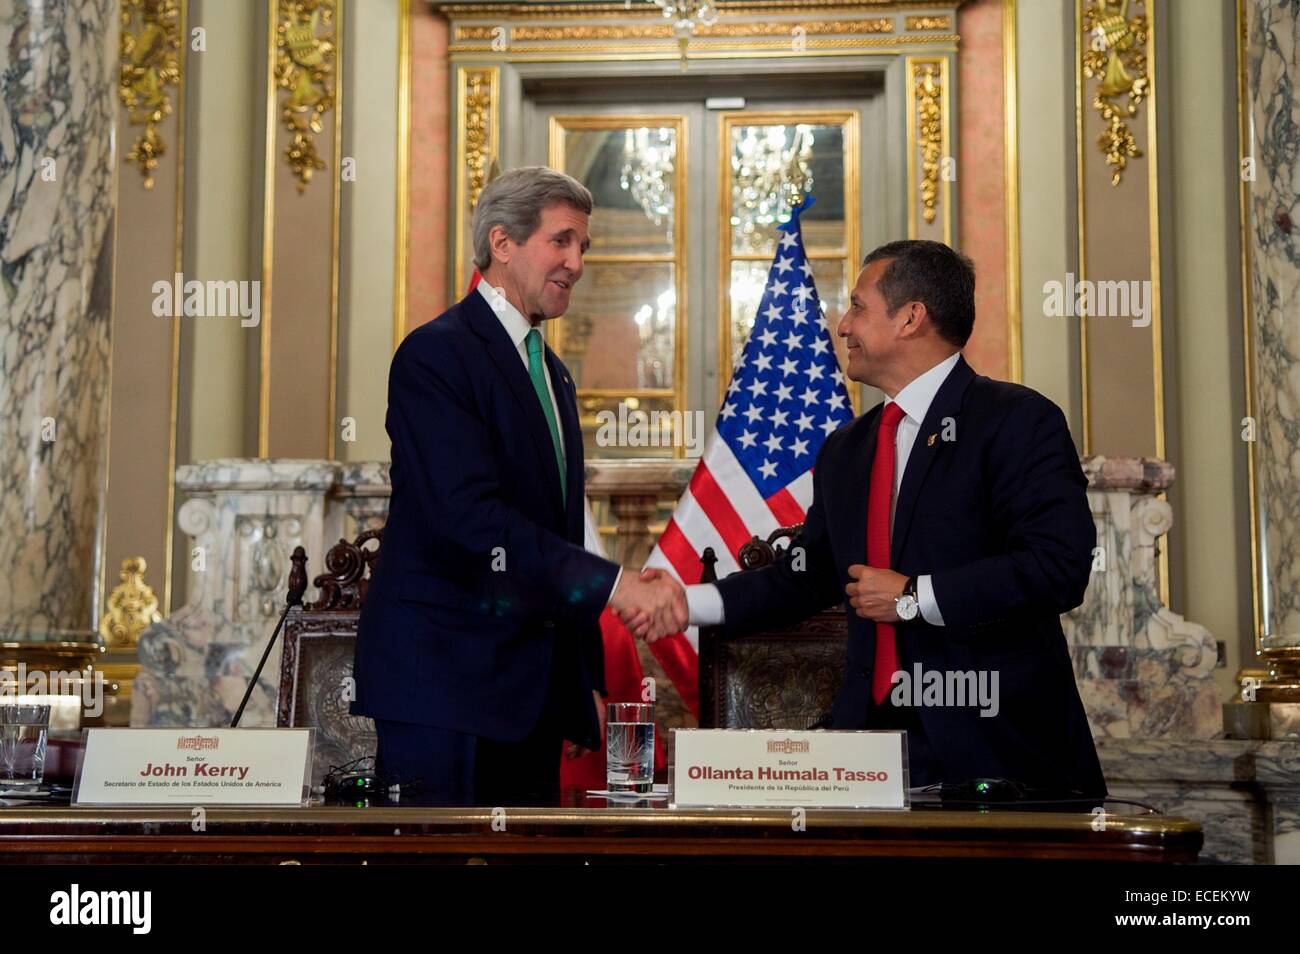 US Secretary of State John Kerry shakes hands with Peruvian President Ollanta Humala Tasso following a joint press conference December 11, 2014 in Lima, Peru. Stock Photo